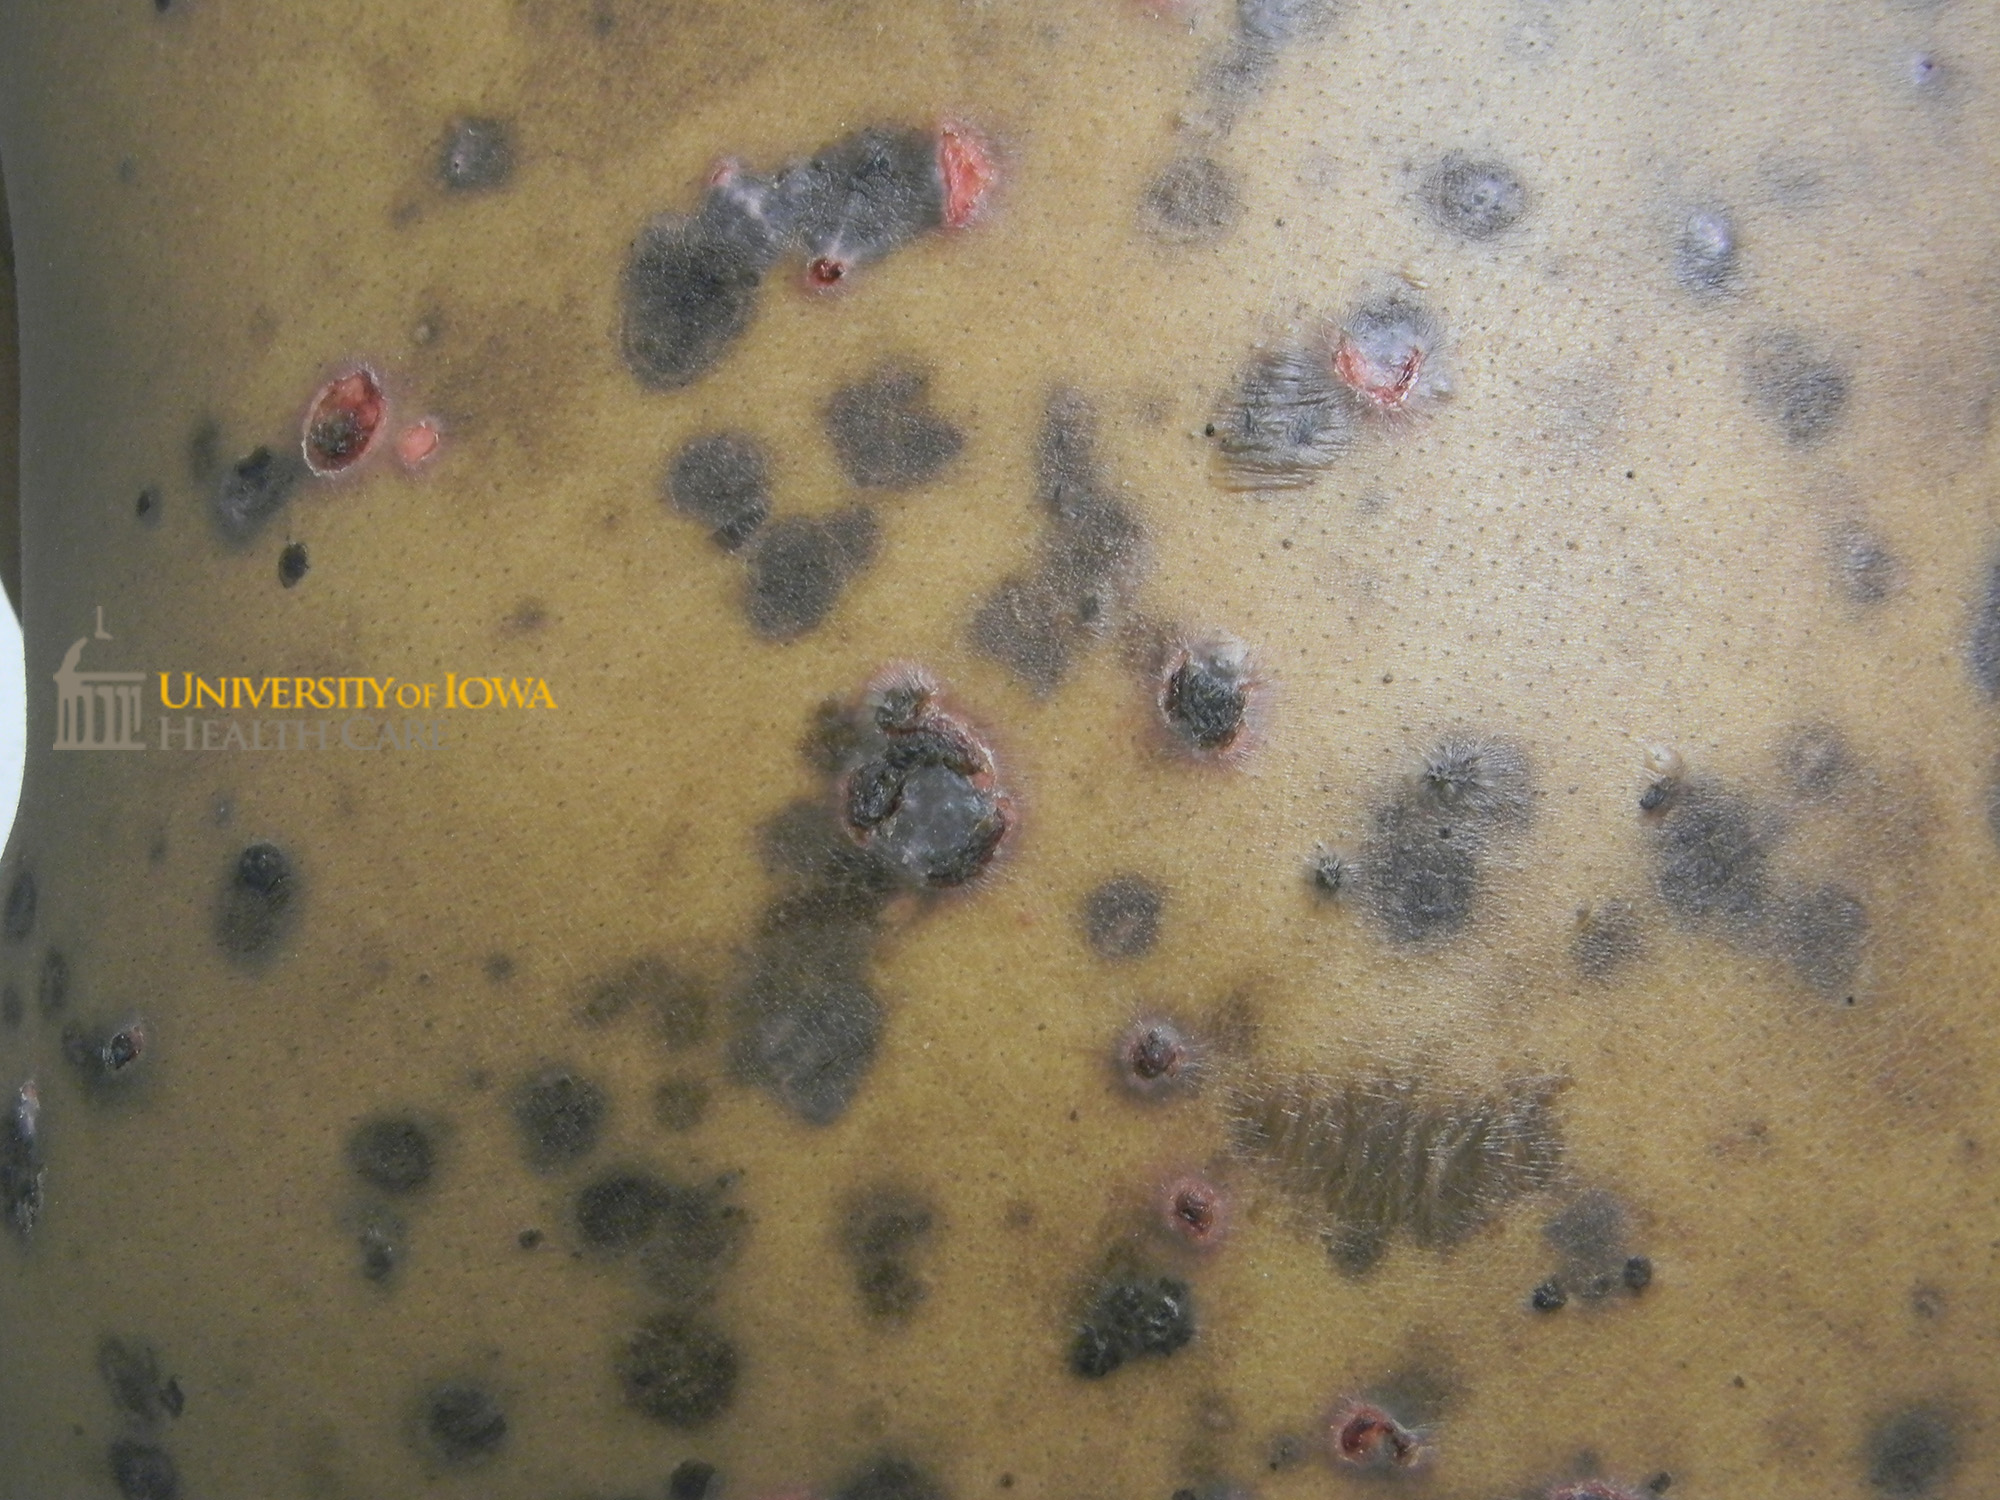 Scattered erosions with hemorrhagic crust and many circular hyperpigmented macules and patches. (click images for higher resolution).